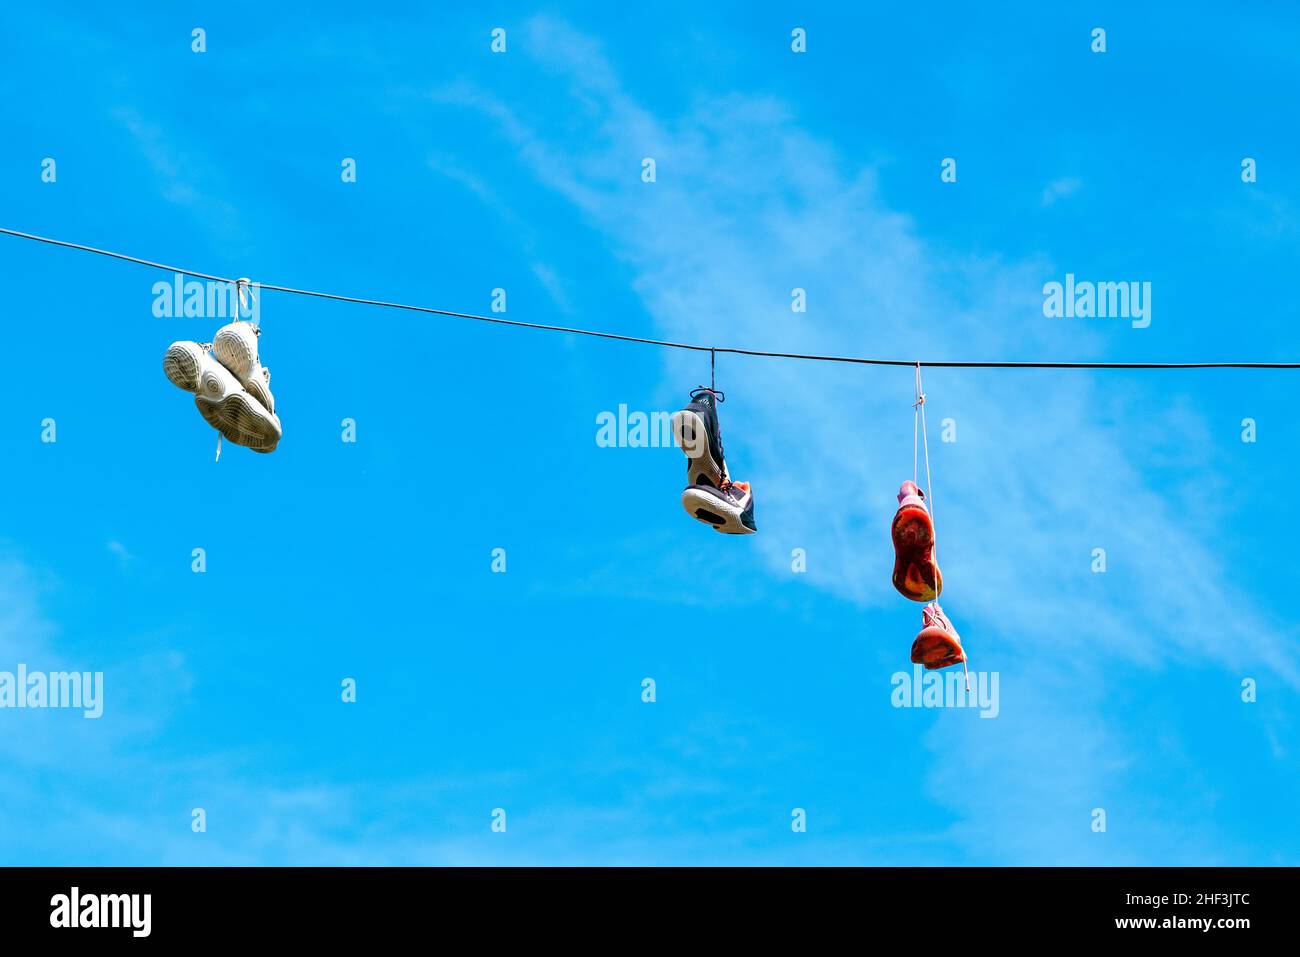 Sneakers hanging by shoe laces on power line Stock Photo